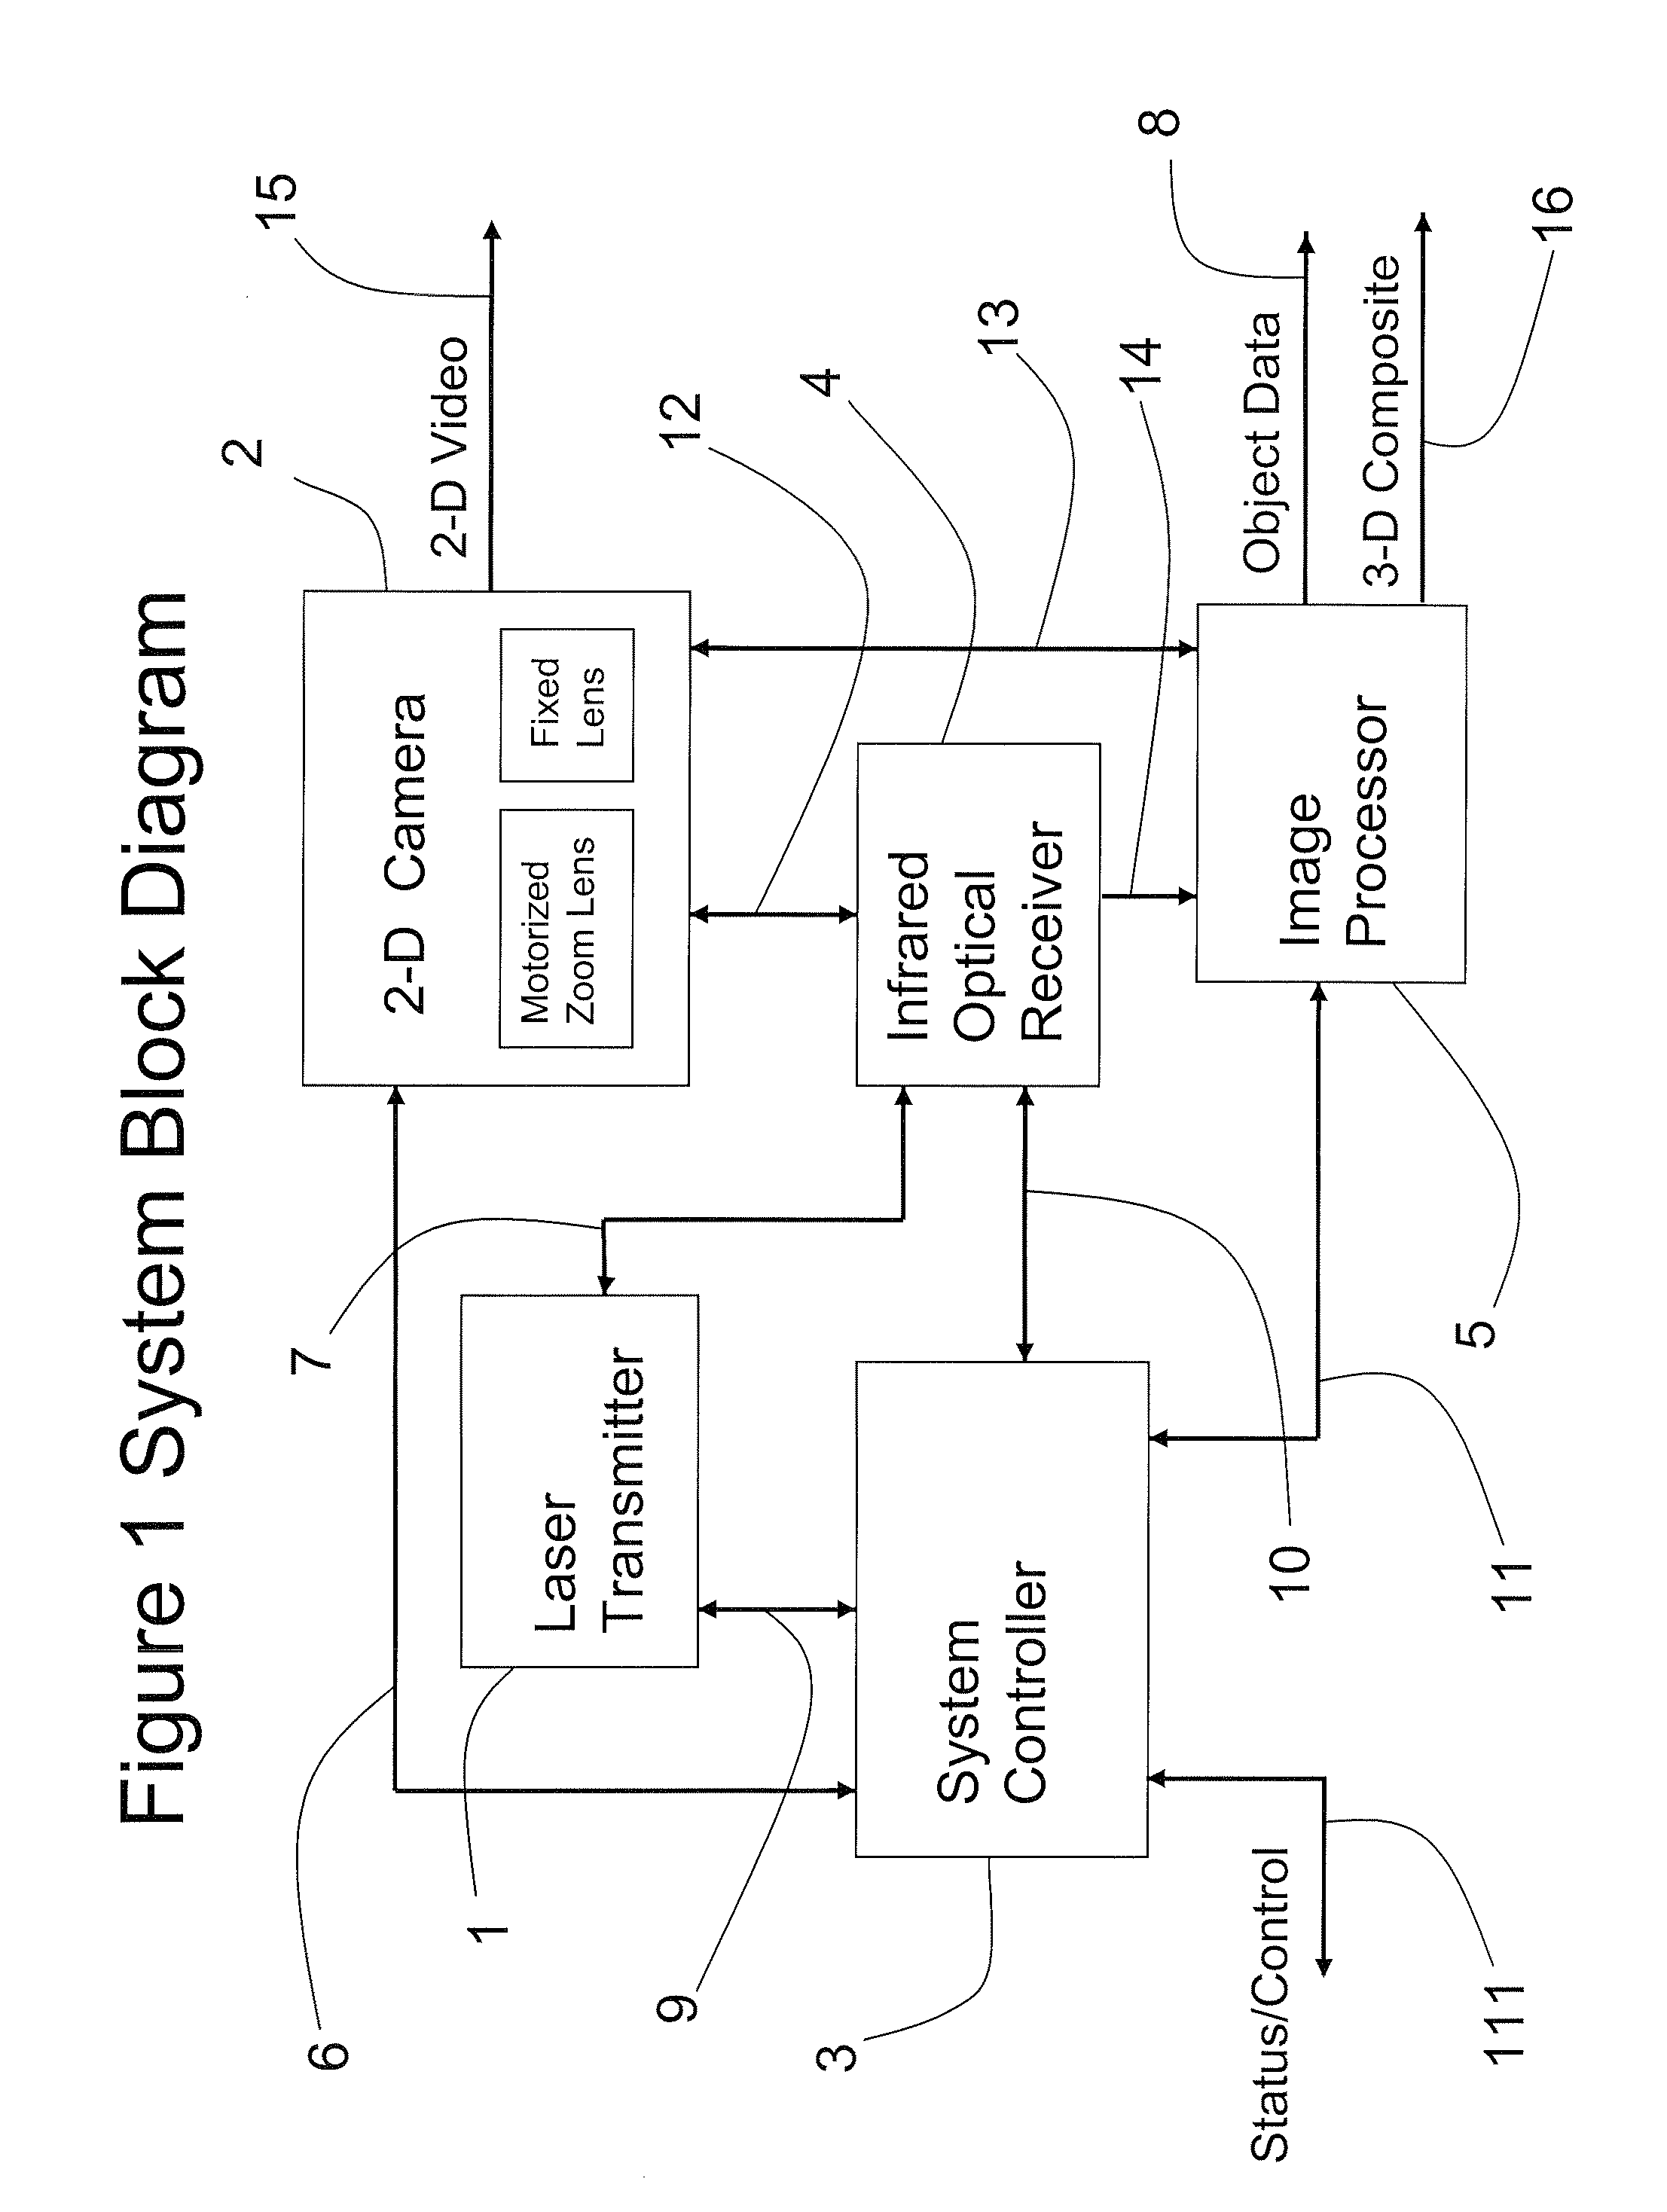 3-dimensional hybrid camera and production system